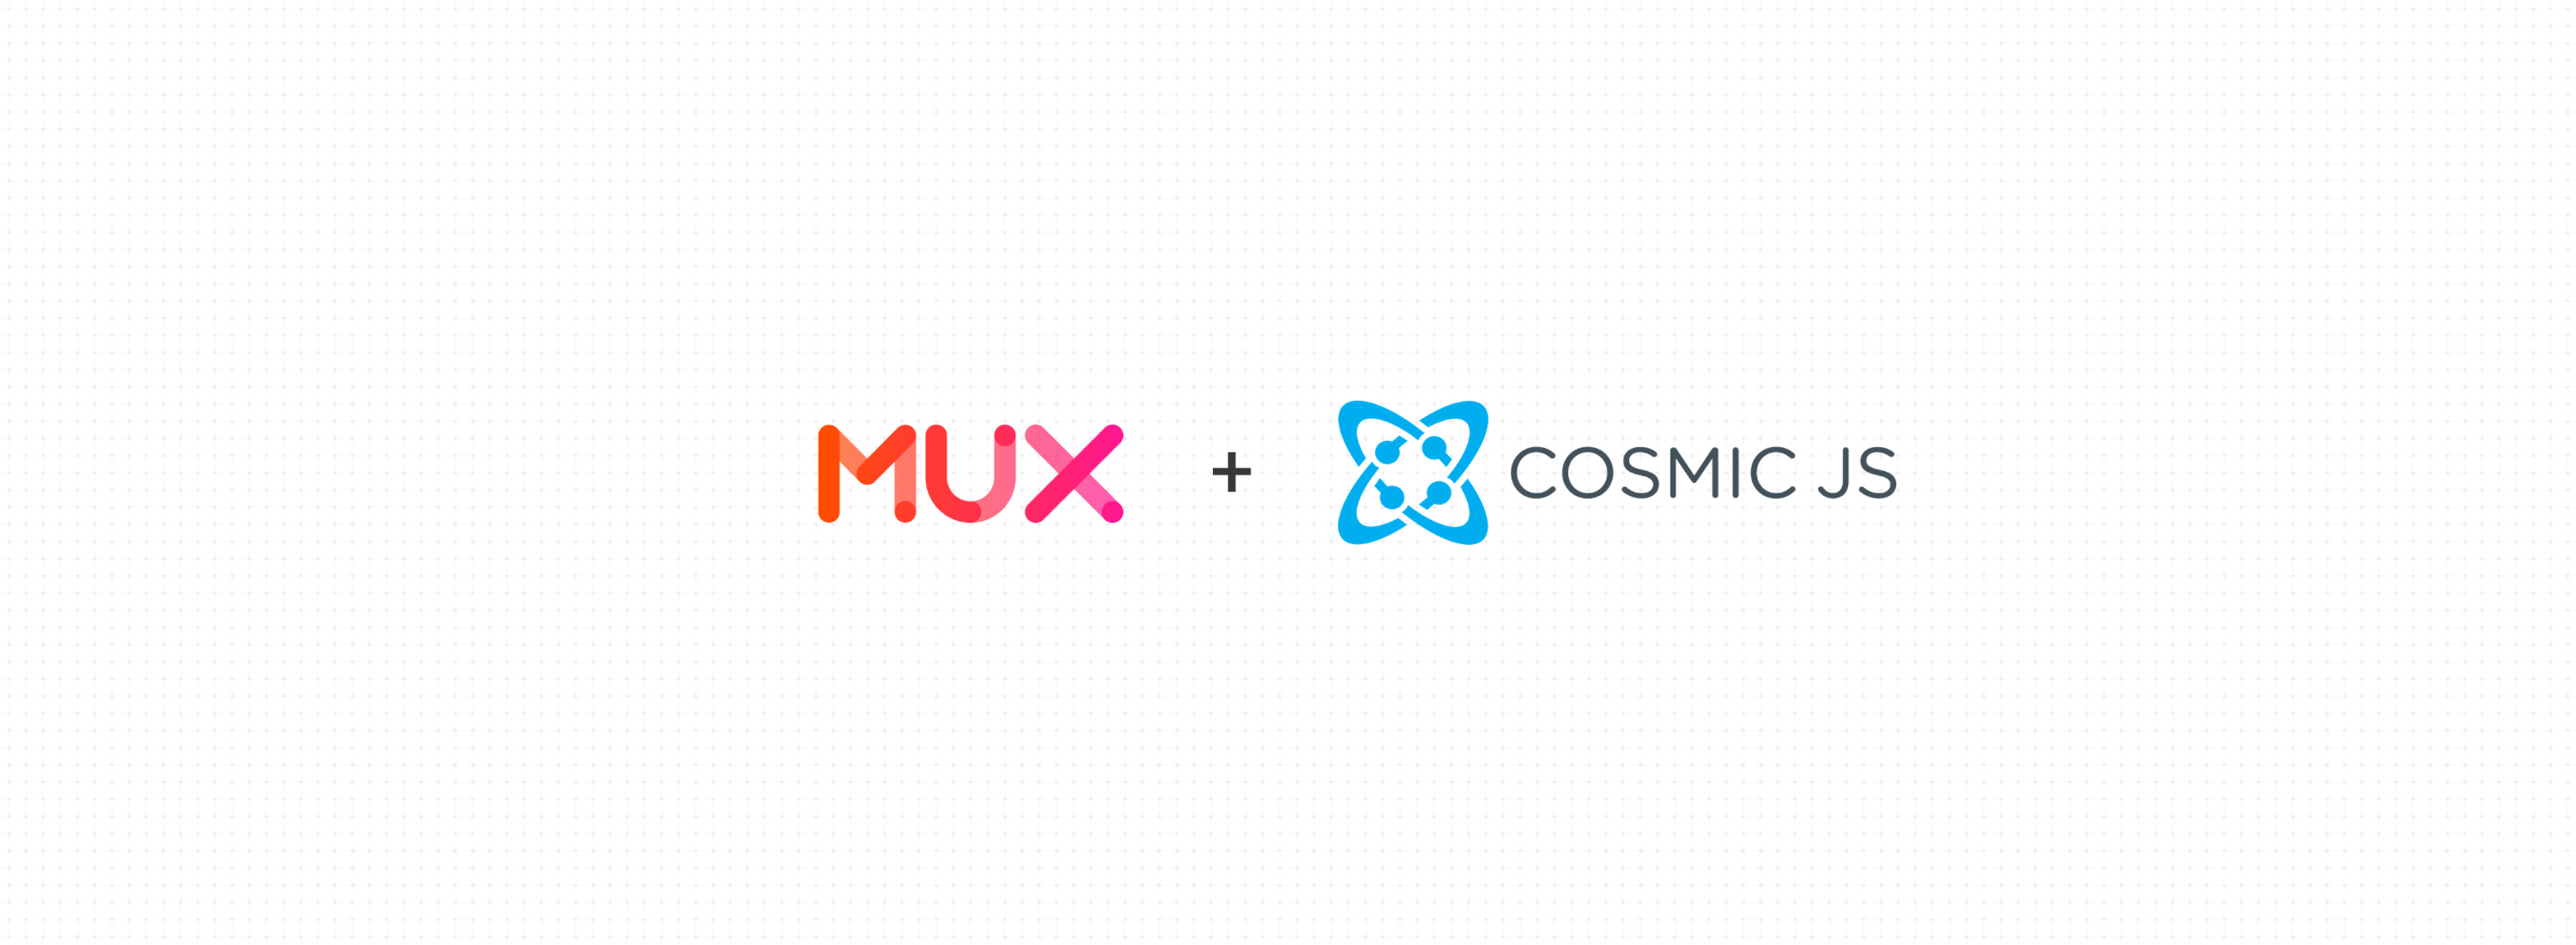 Announcing our partnership with Cosmic JS